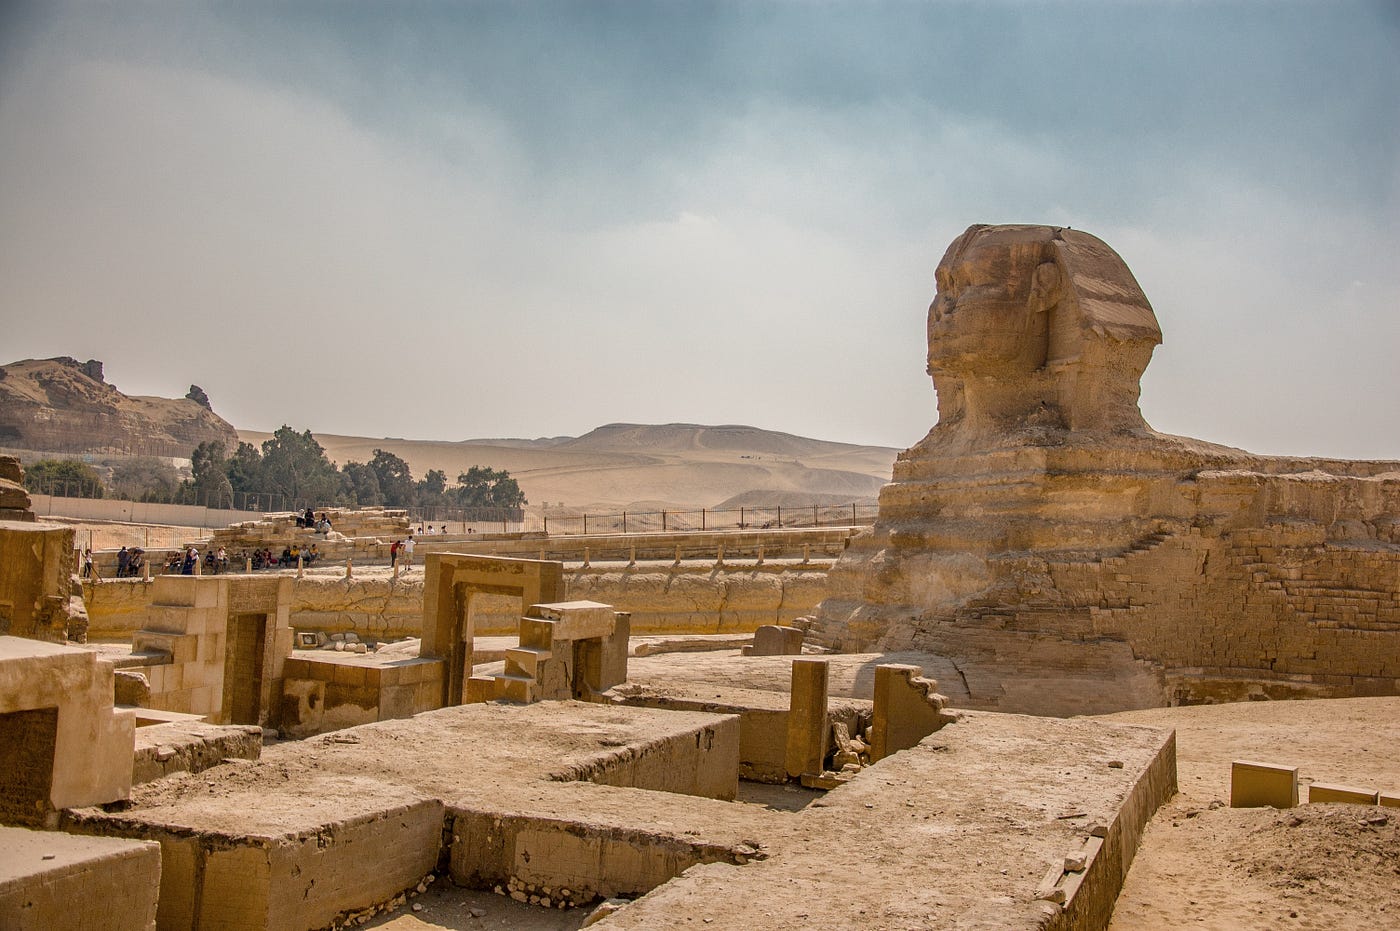 Which ancient city is located near Cairo?